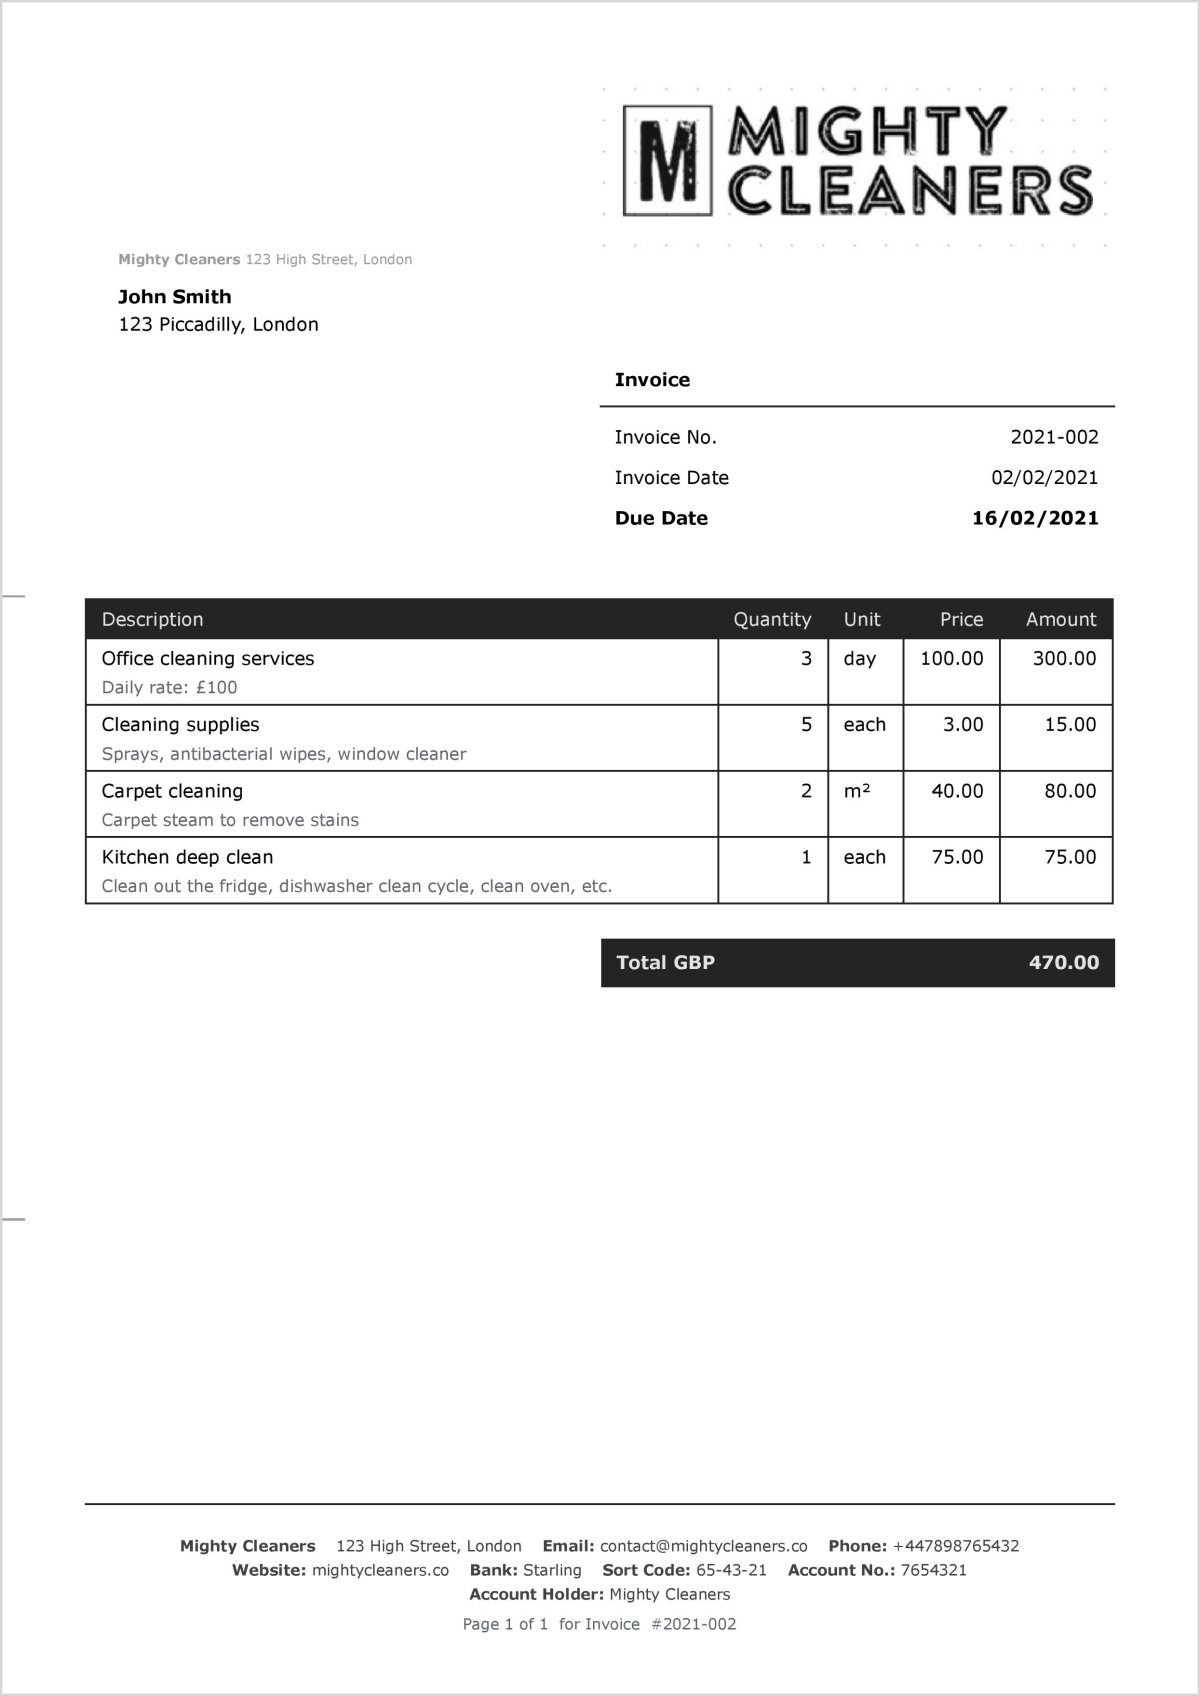 Example of an invoice for a cleaning business.